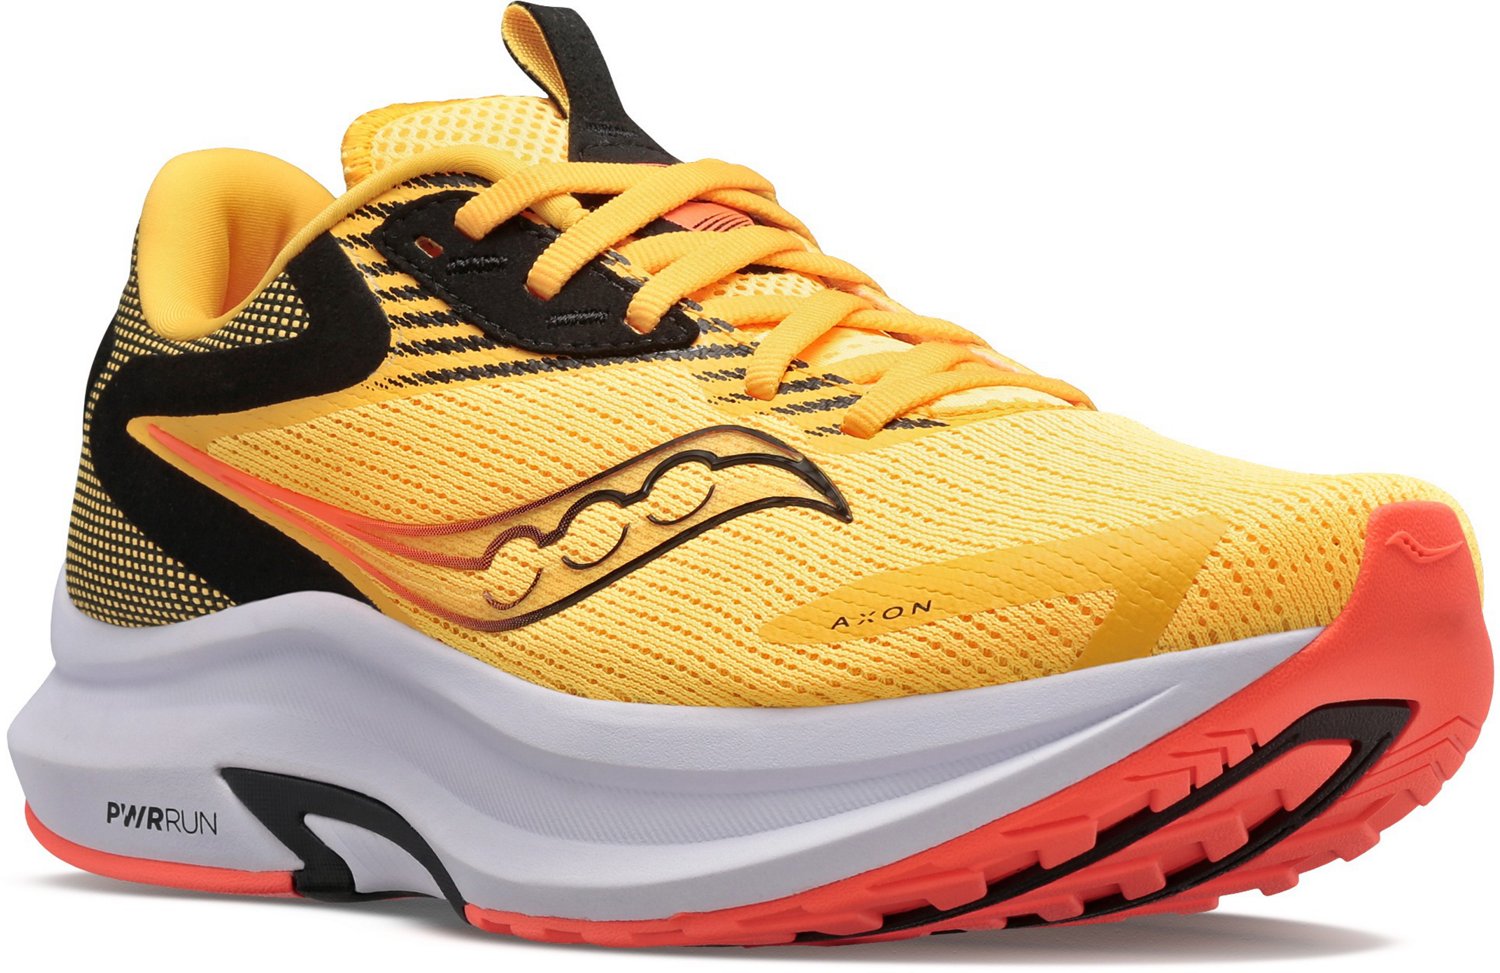 Saucony Men's Axon 2 Running Shoes | Free Shipping at Academy